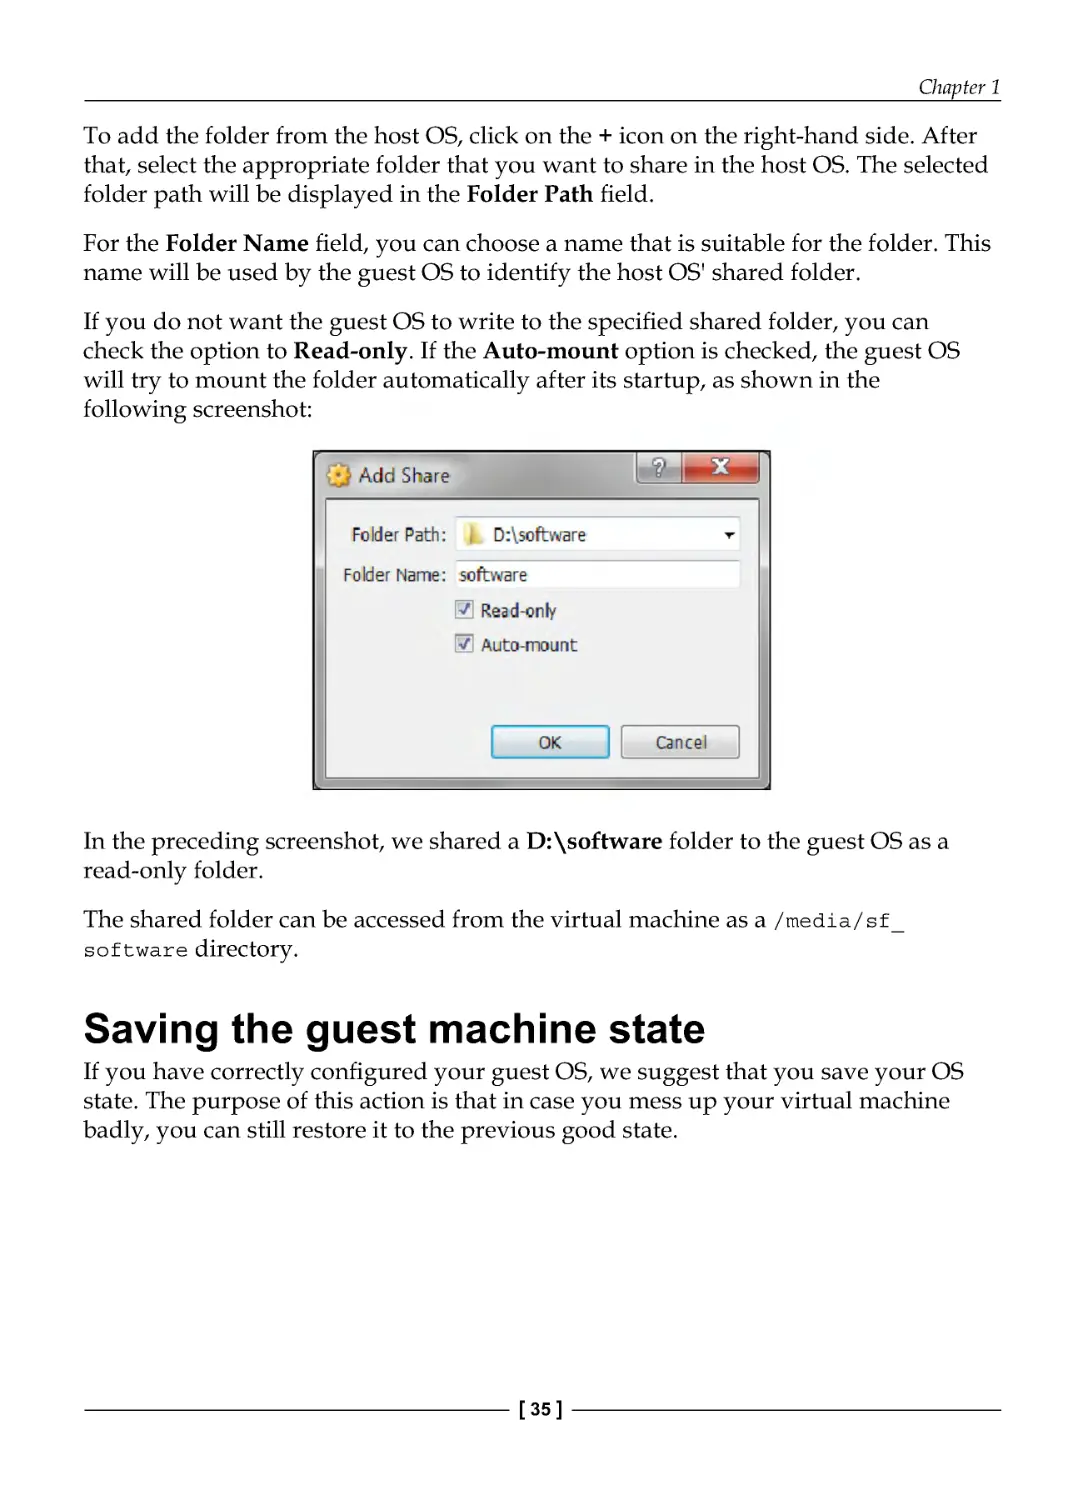 Saving the guest machine state